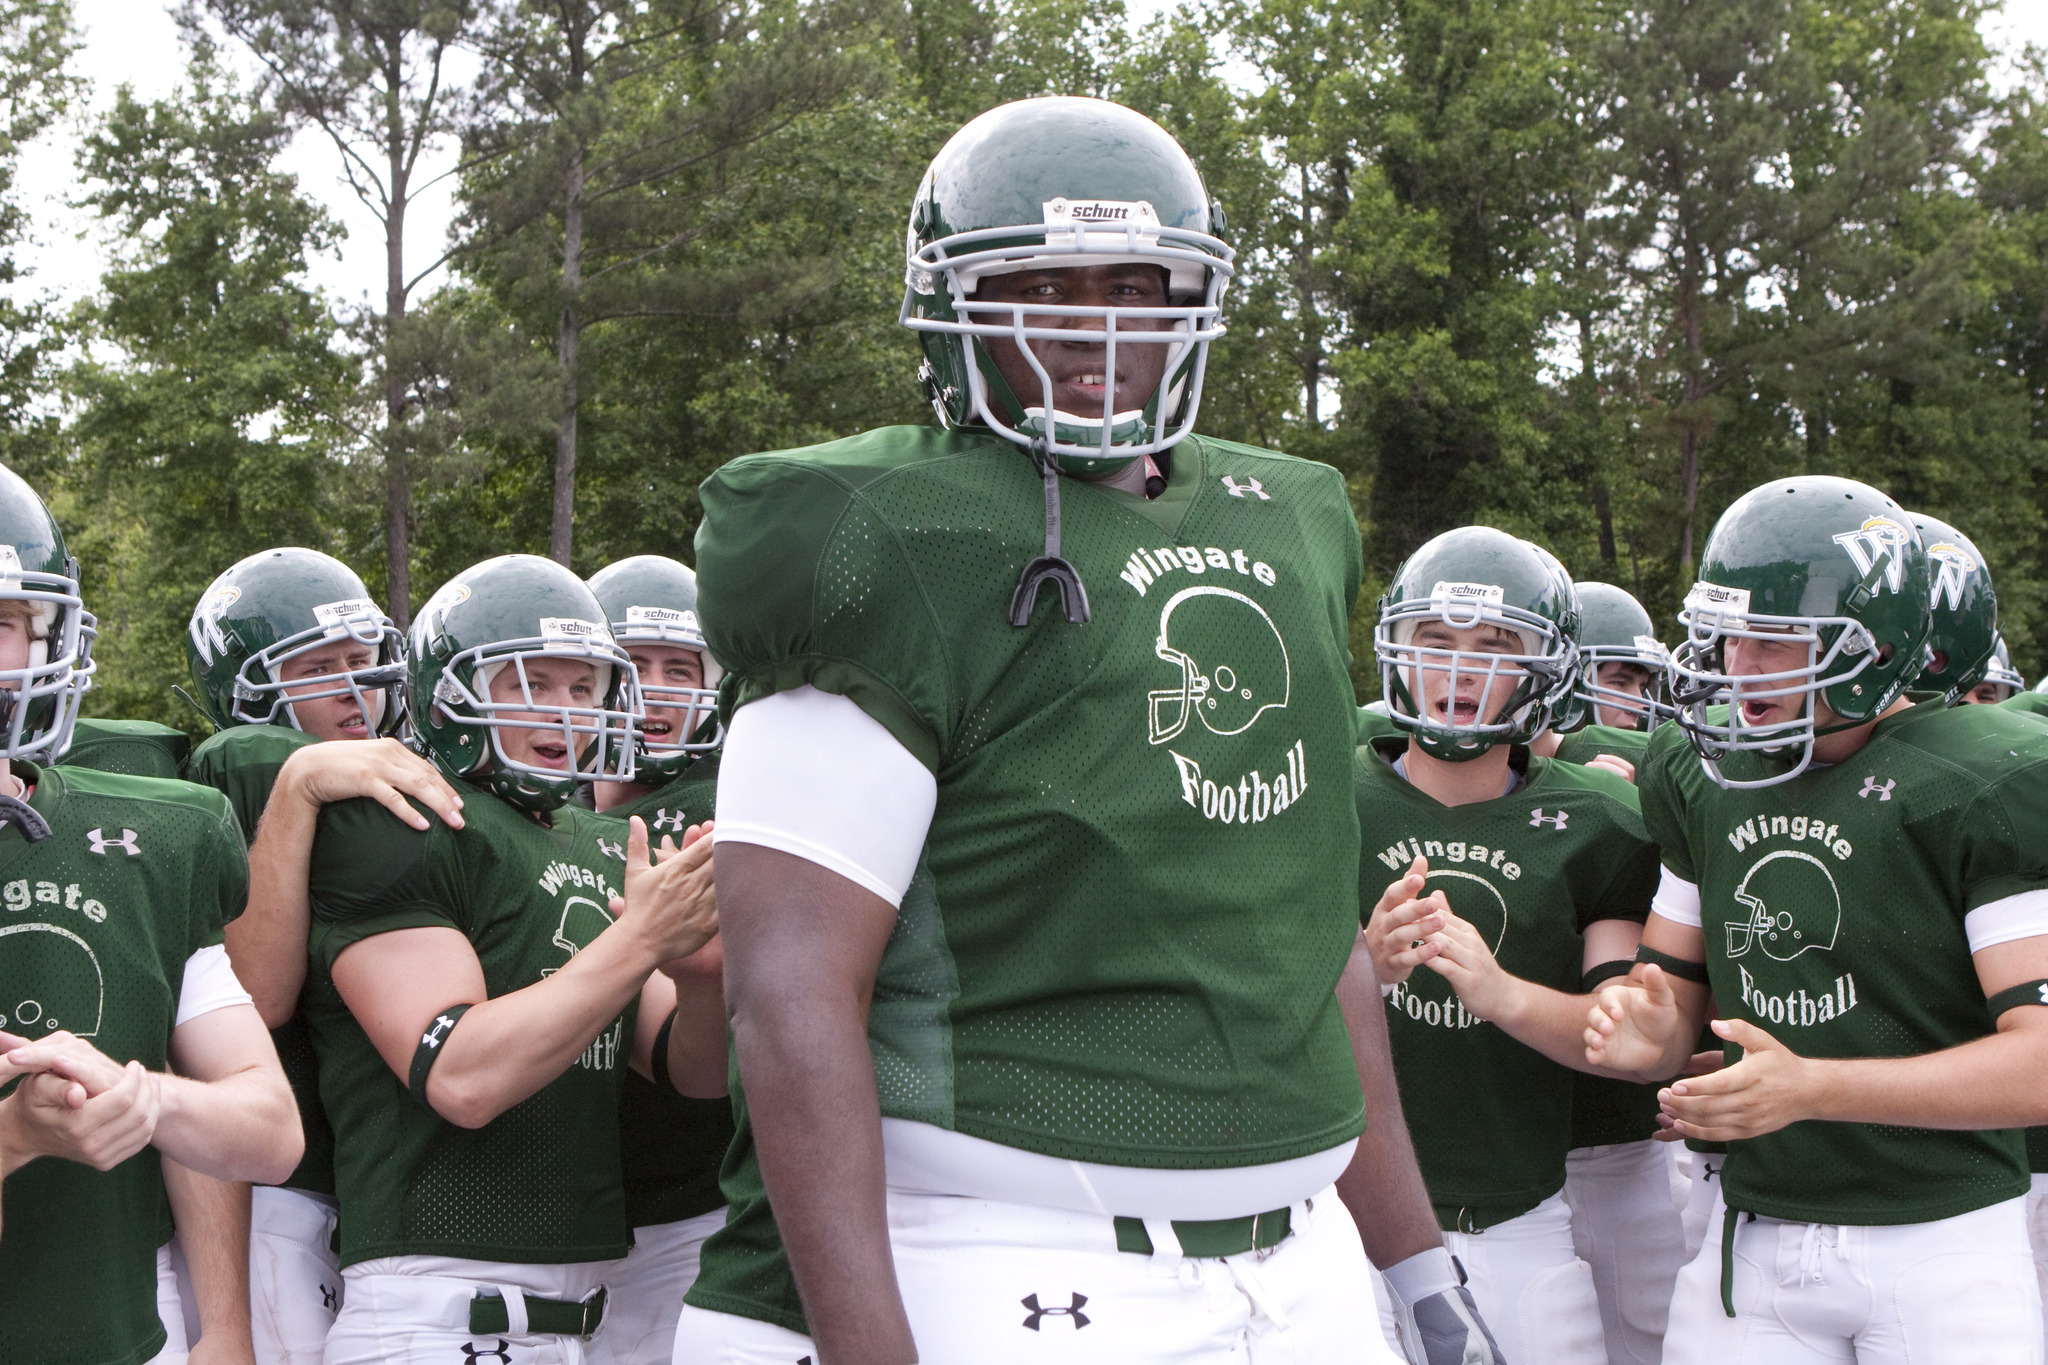 Still of Quinton Aaron in The Blind Side (2009)